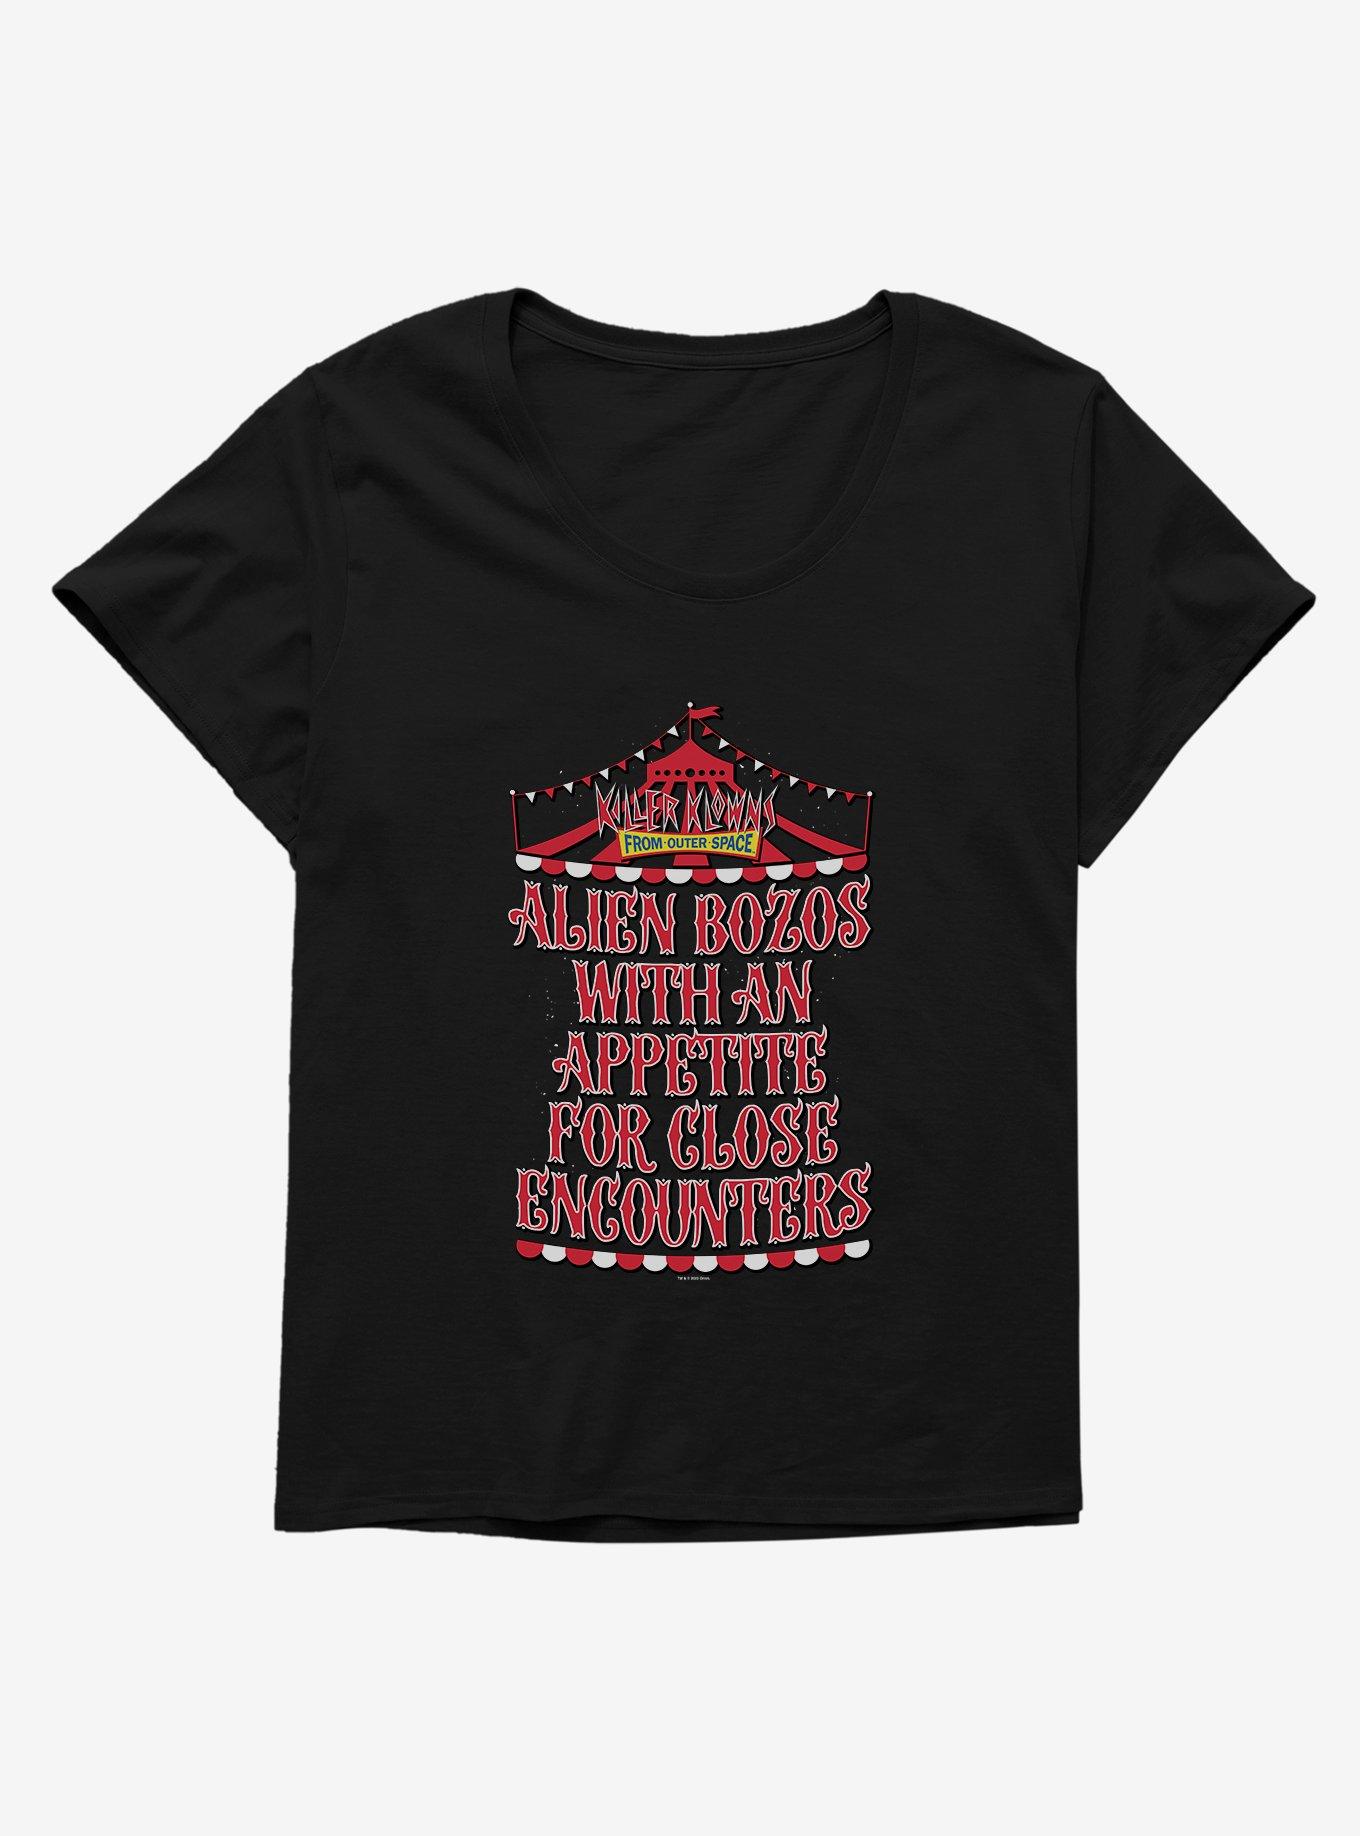 Killer Klowns From Outer Space Alien Bozos With An Apetite For Close Encounters Girls T-Shirt Plus Size, BLACK, hi-res